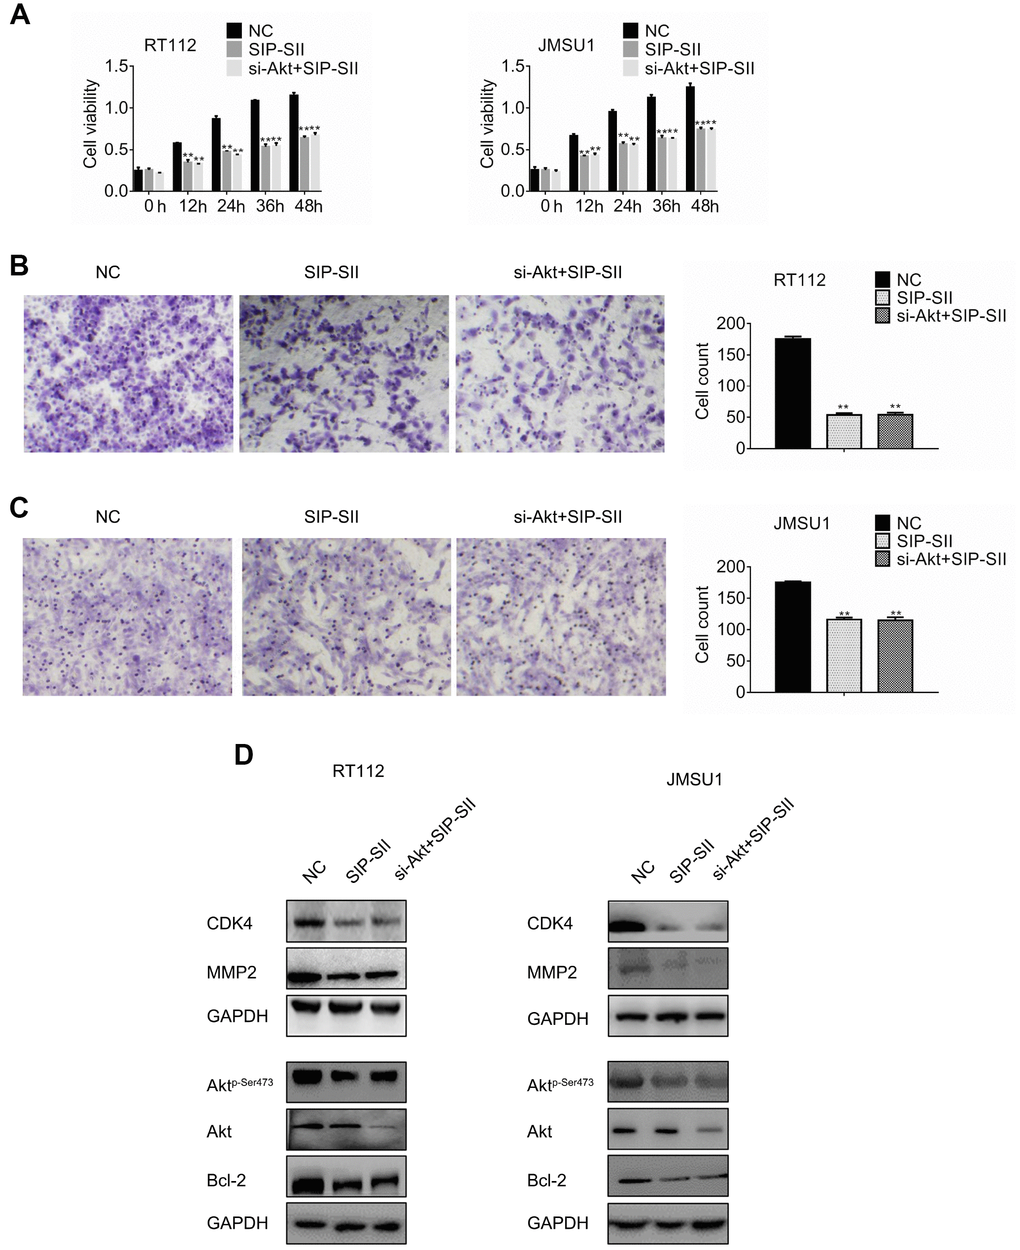 SIP-SII hampers proliferation and migration of bladder cancer cells in an Akt-dependent manner. (A) Cell viability (MTT) assay results for RT112 and JMSU1 cells treated with negative control siRNA (NC), 5.0 μM SIP-SII, or dual treatment with SIP-SII and Akt siRNA (si-Akt) for 24 h. Cell migration assay results for RT112 cells (B) and JMSU1 cells (C) treated with SIP-SII alone or in combination with si-Akt for 24 h. Representative images at 200x magnification. Data are mean ± SD (error bars) of three experiments performed in triplicate. **P D) and JMSU1 (E) cells treated with DMSO, SIP-SII, or the combination of SIP-SII and si-Akt for 24 h.